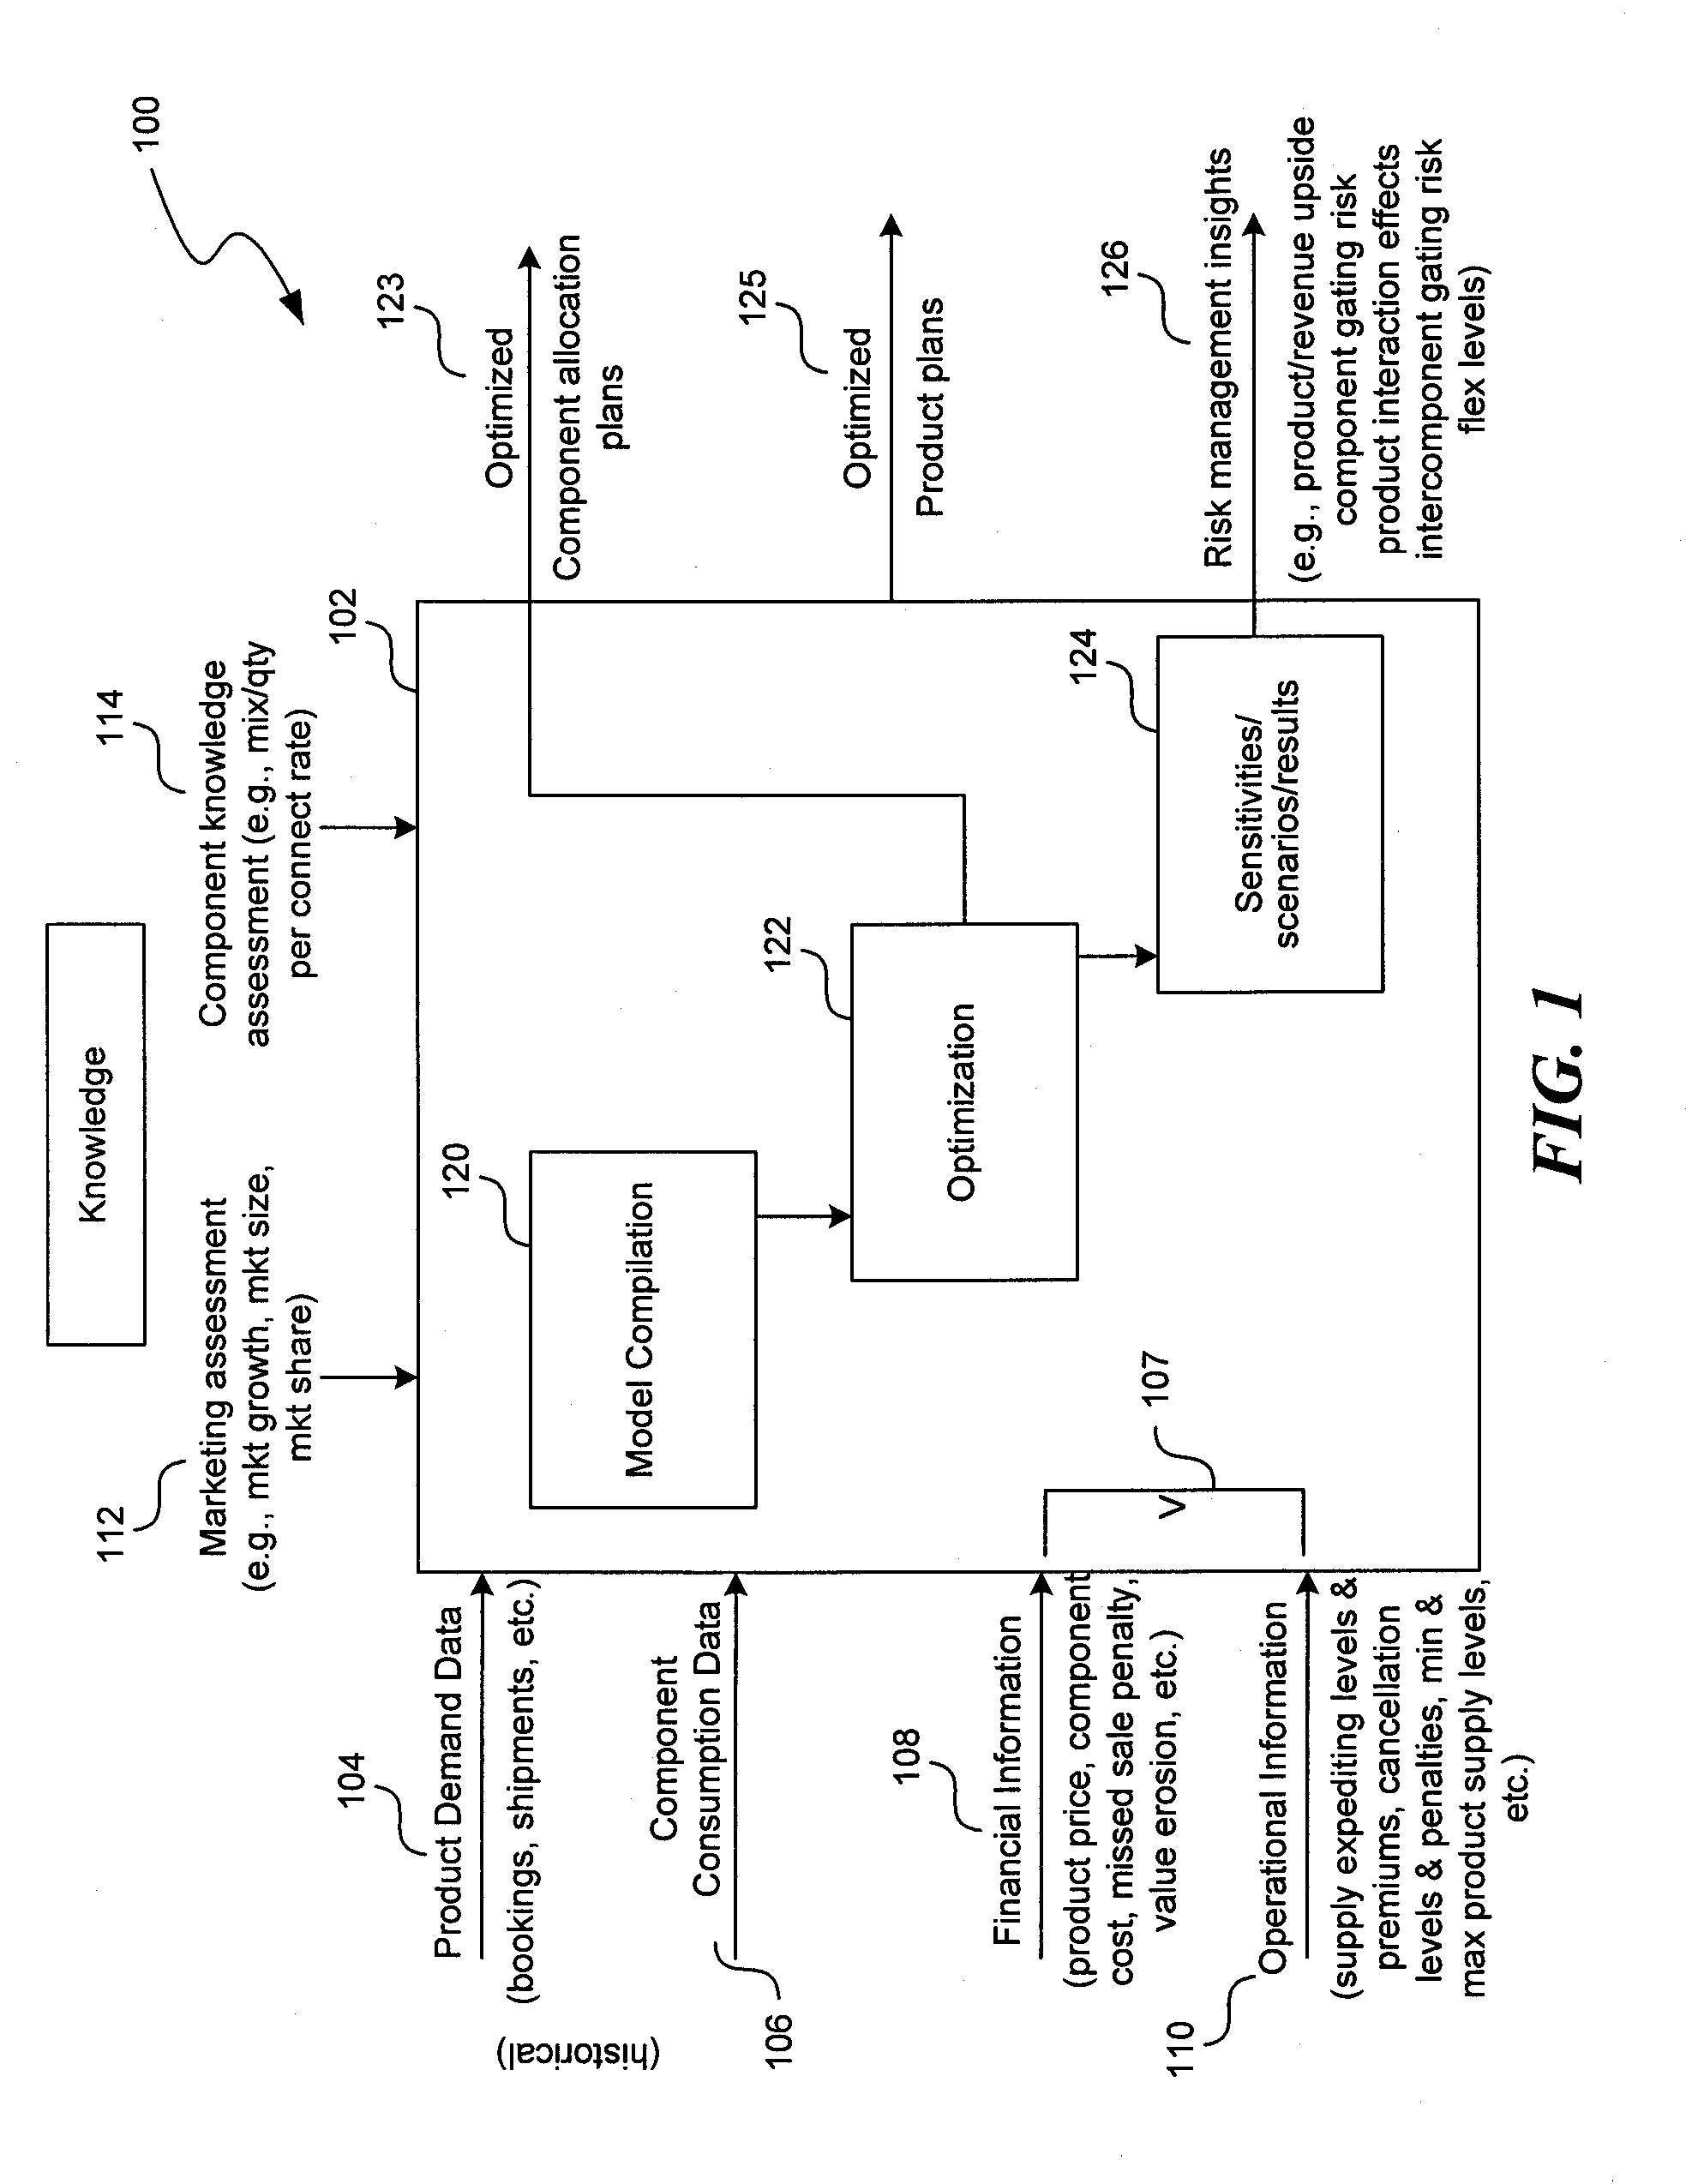 Method and apparatus for optimizing a multivariate allocation of resources